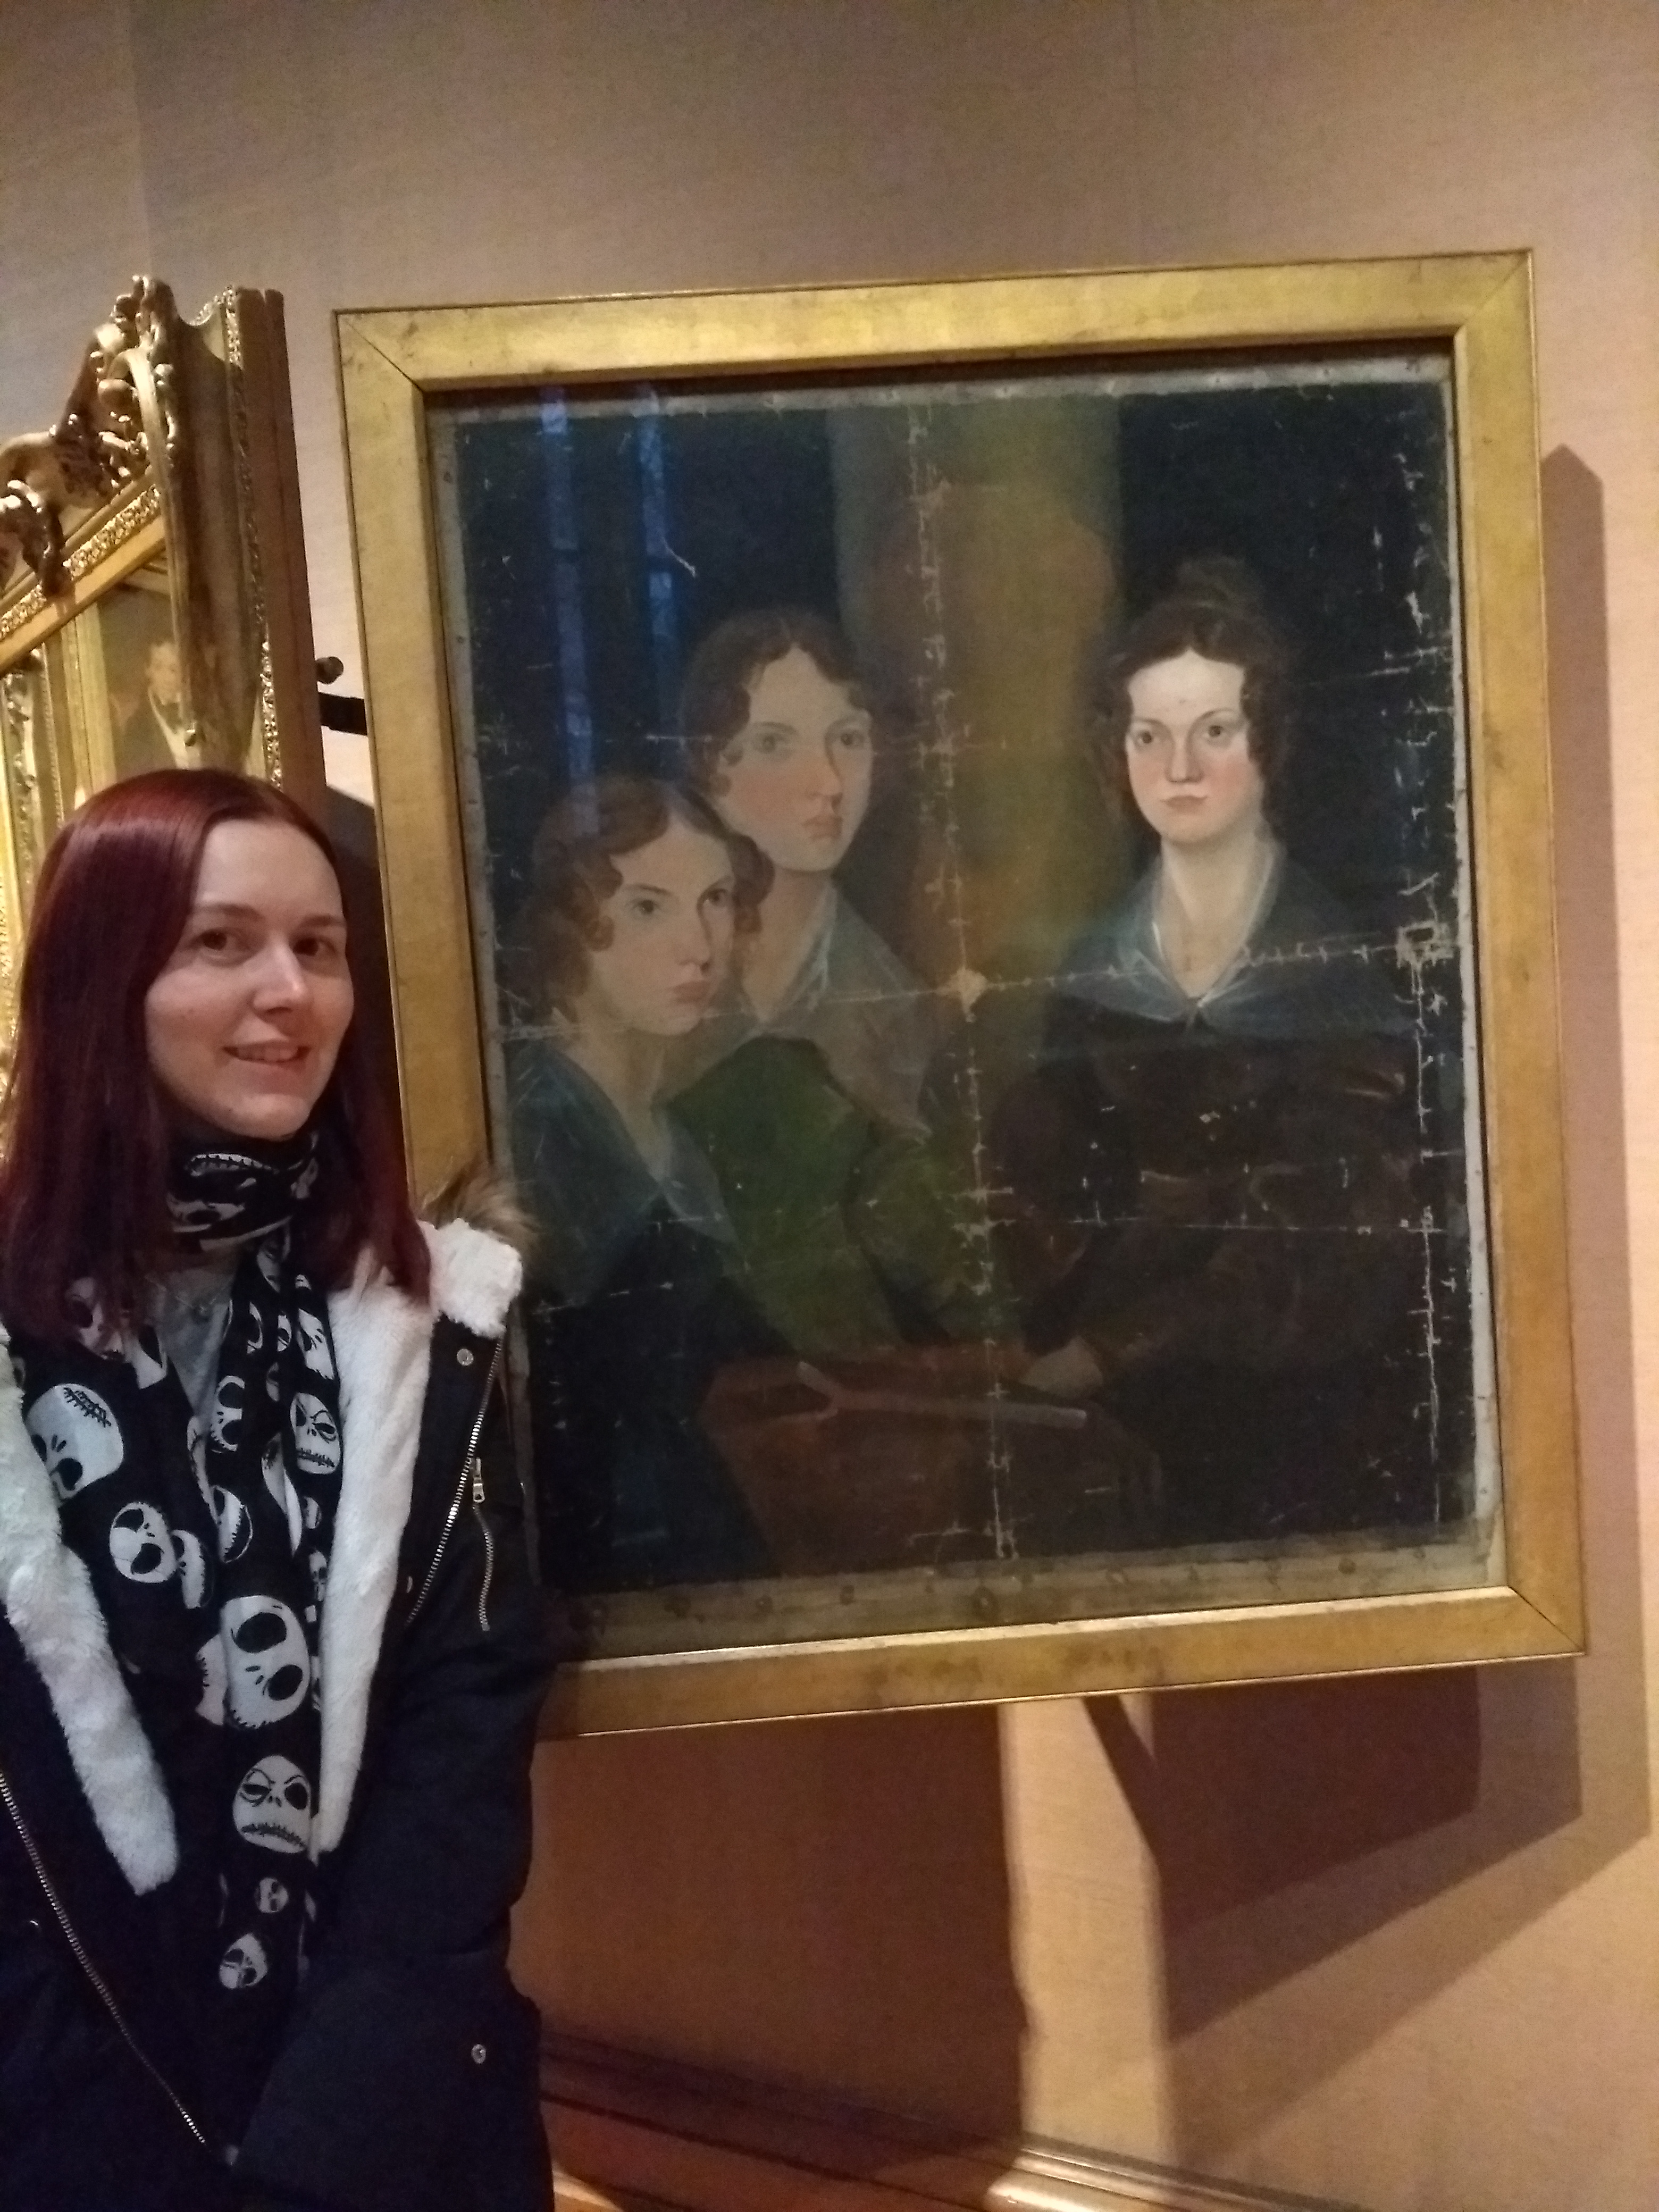 Nicola Friar posing for photo with famous artwork